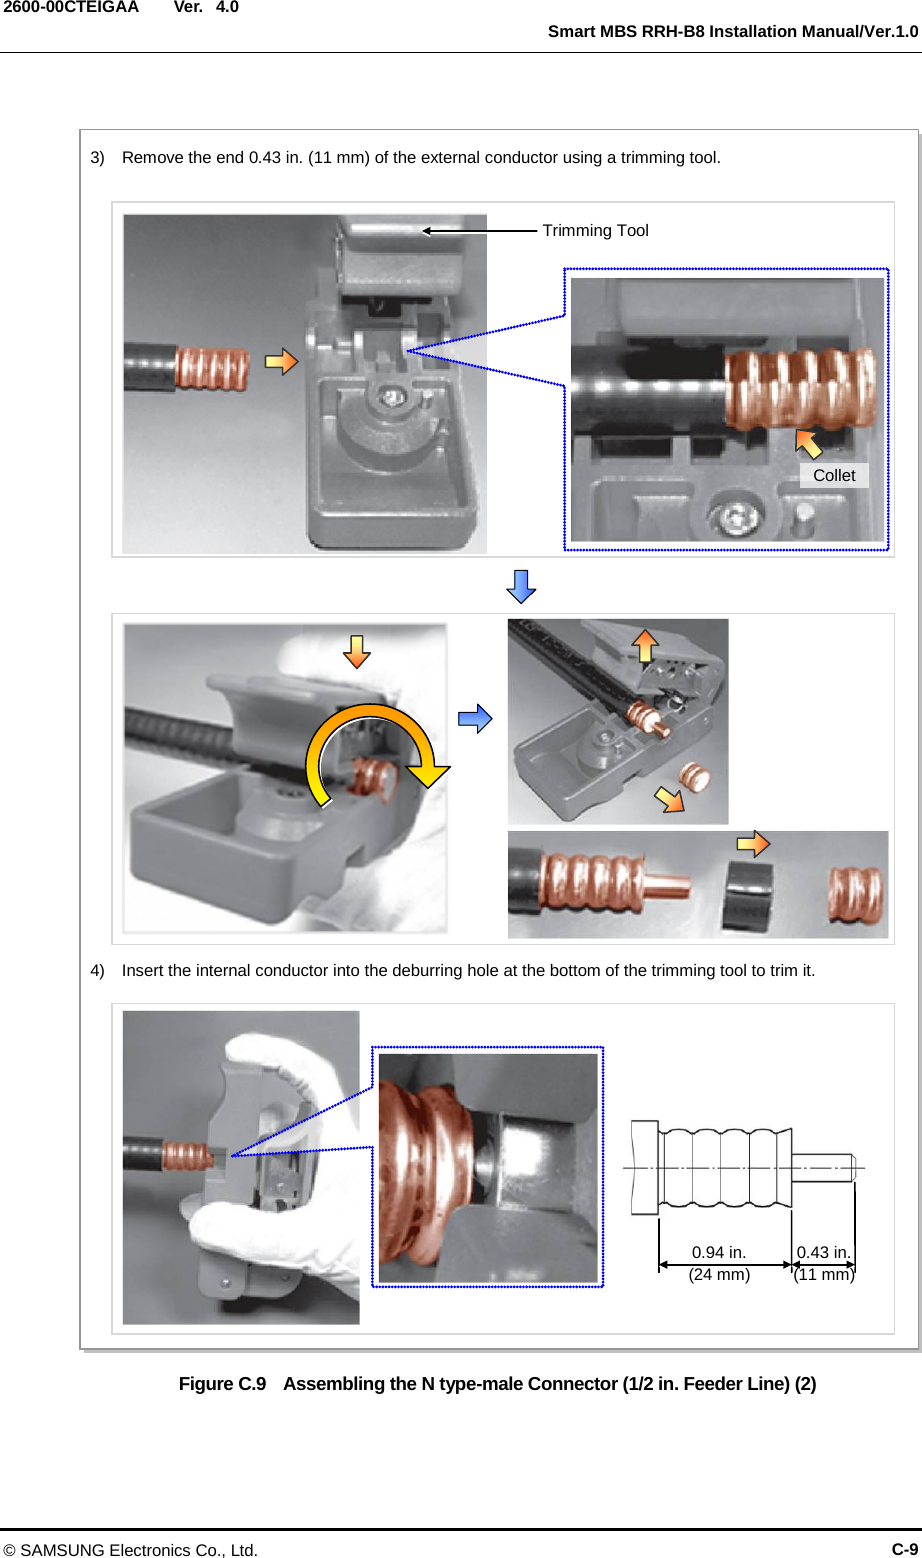  Ver.   Smart MBS RRH-B8 Installation Manual/Ver.1.0 2600-00CTEIGAA 4.0  Figure C.9  Assembling the N type-male Connector (1/2 in. Feeder Line) (2)   Trimming Tool 3)  Remove the end 0.43 in. (11 mm) of the external conductor using a trimming tool. Collet 4)    Insert the internal conductor into the deburring hole at the bottom of the trimming tool to trim it. 0.94 in. (24 mm) 0.43 in. (11 mm) © SAMSUNG Electronics Co., Ltd. C-9 